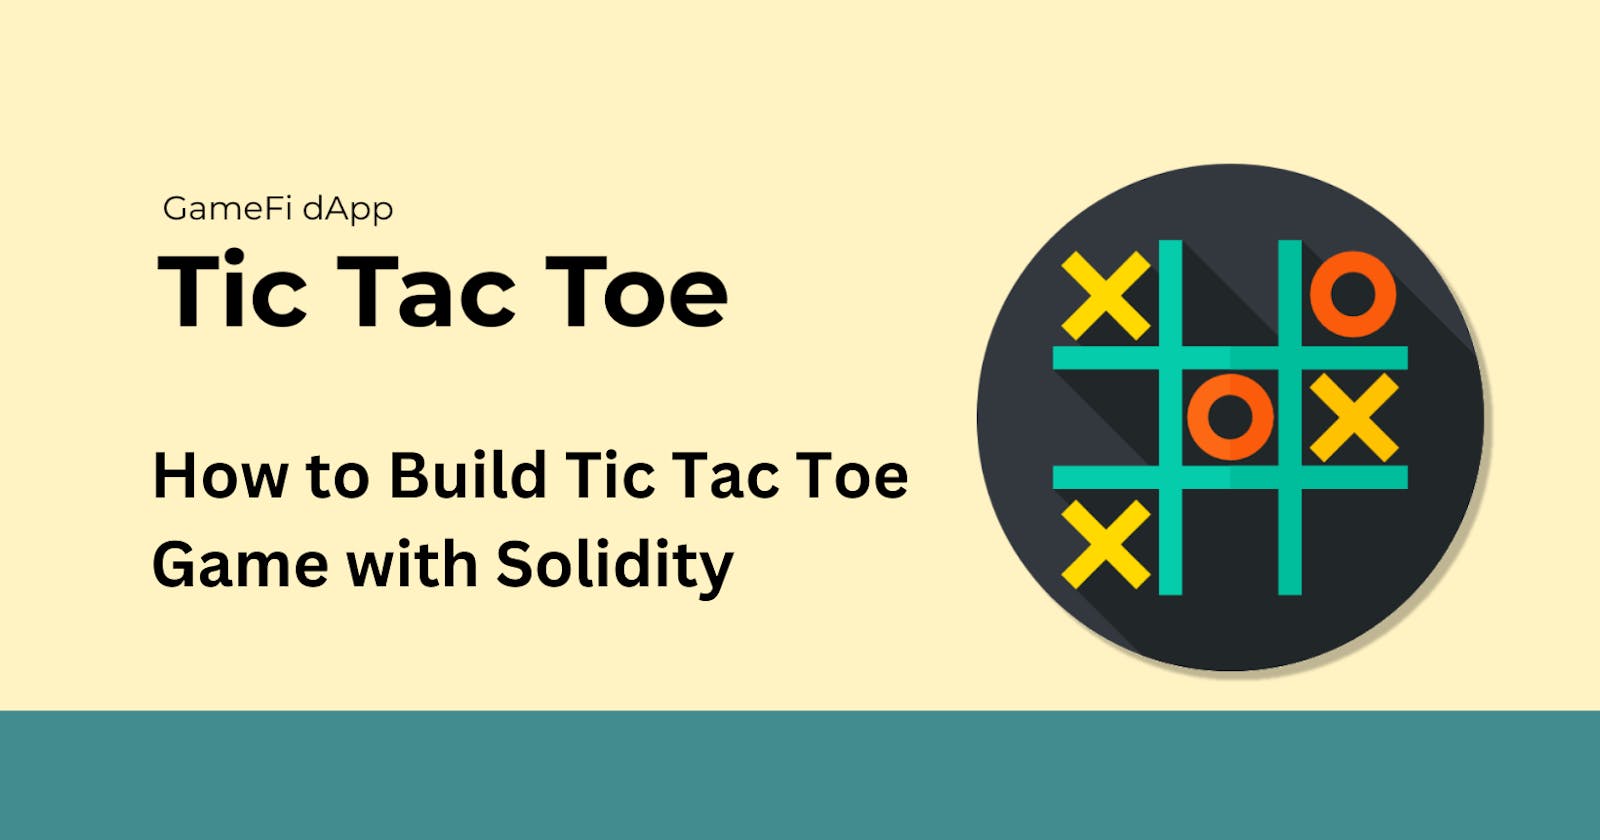 How to Build Tic Tac Toe Game with Solidity